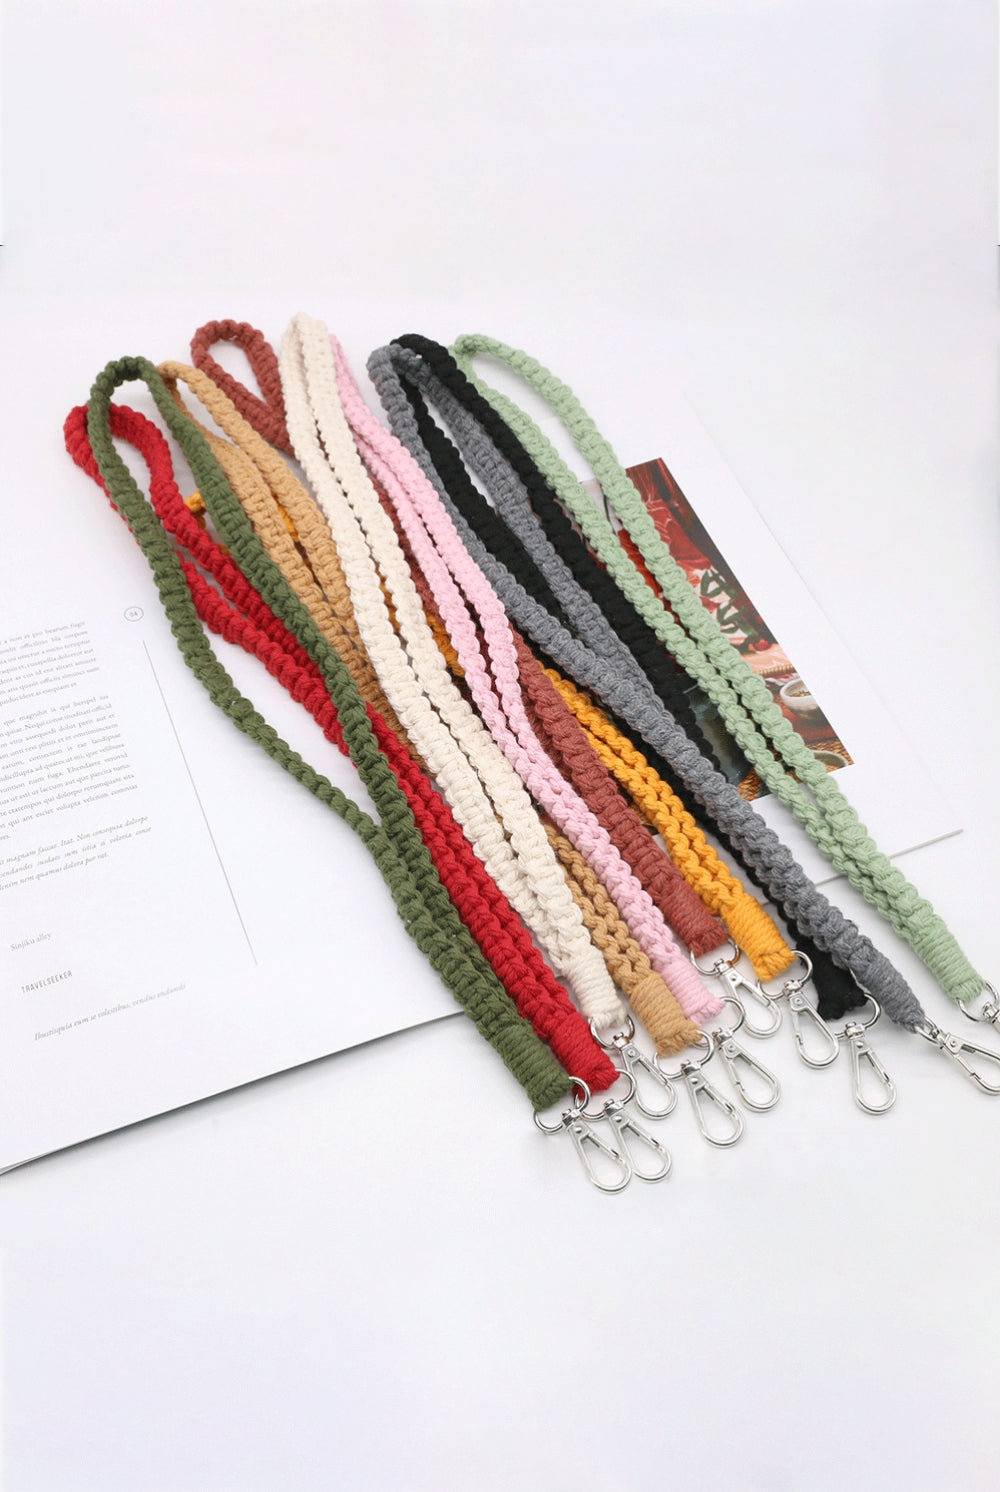 Lavender Assorted 2-Pack Hand-Woven Lanyard Keychain Key Chains